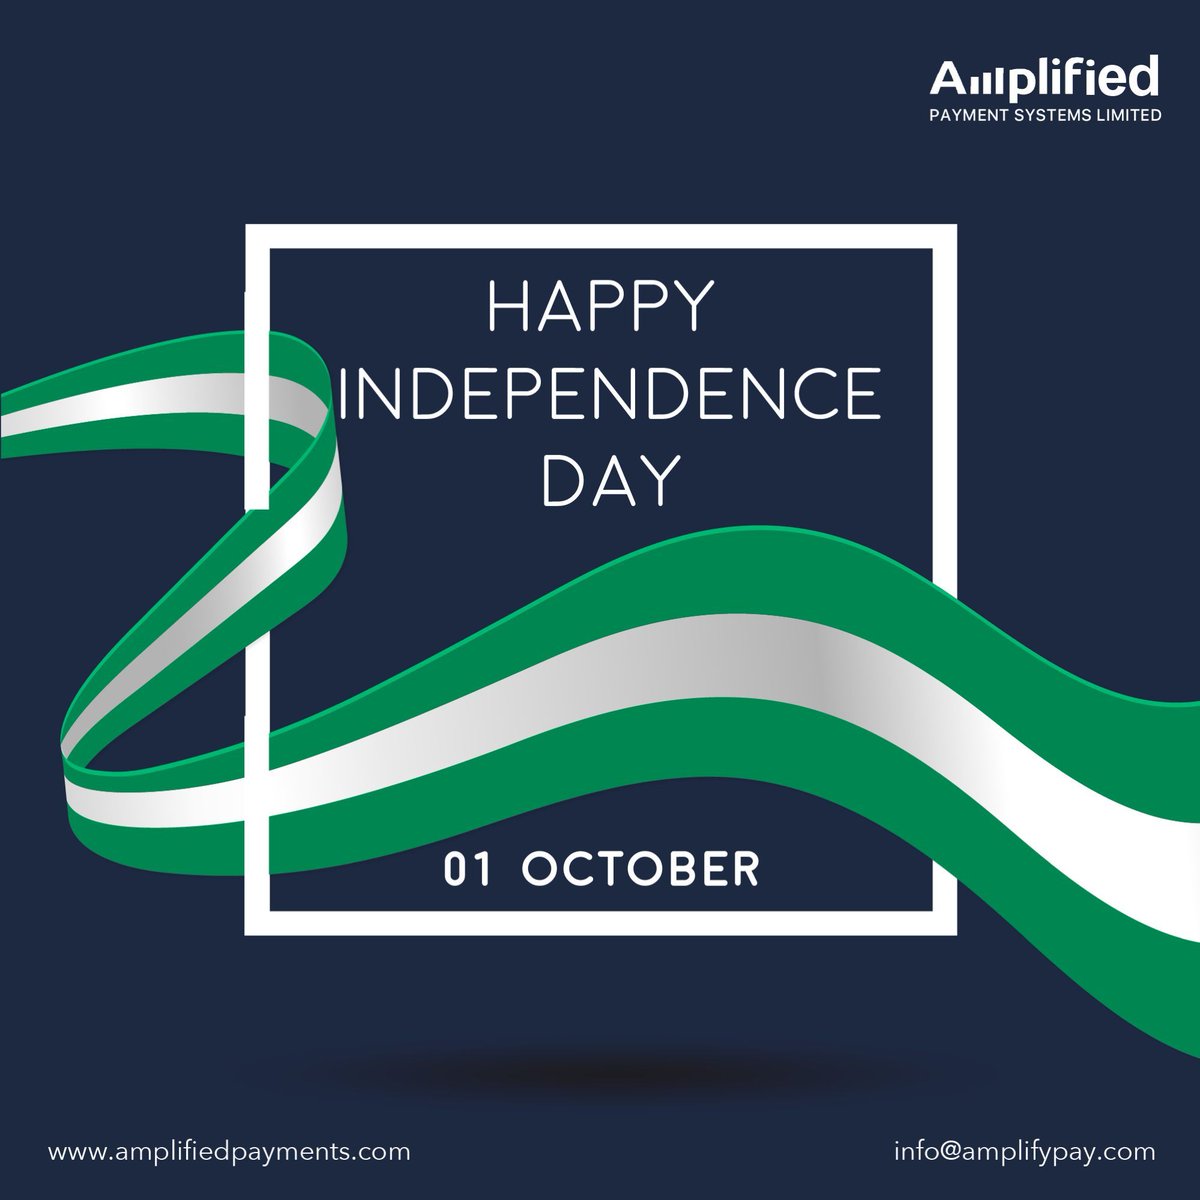 May the flag of our country always fly high and higher as we mark our 58th Independence Day. Welcome to a new month! #October1st #IndependenceDay2018 #fintech